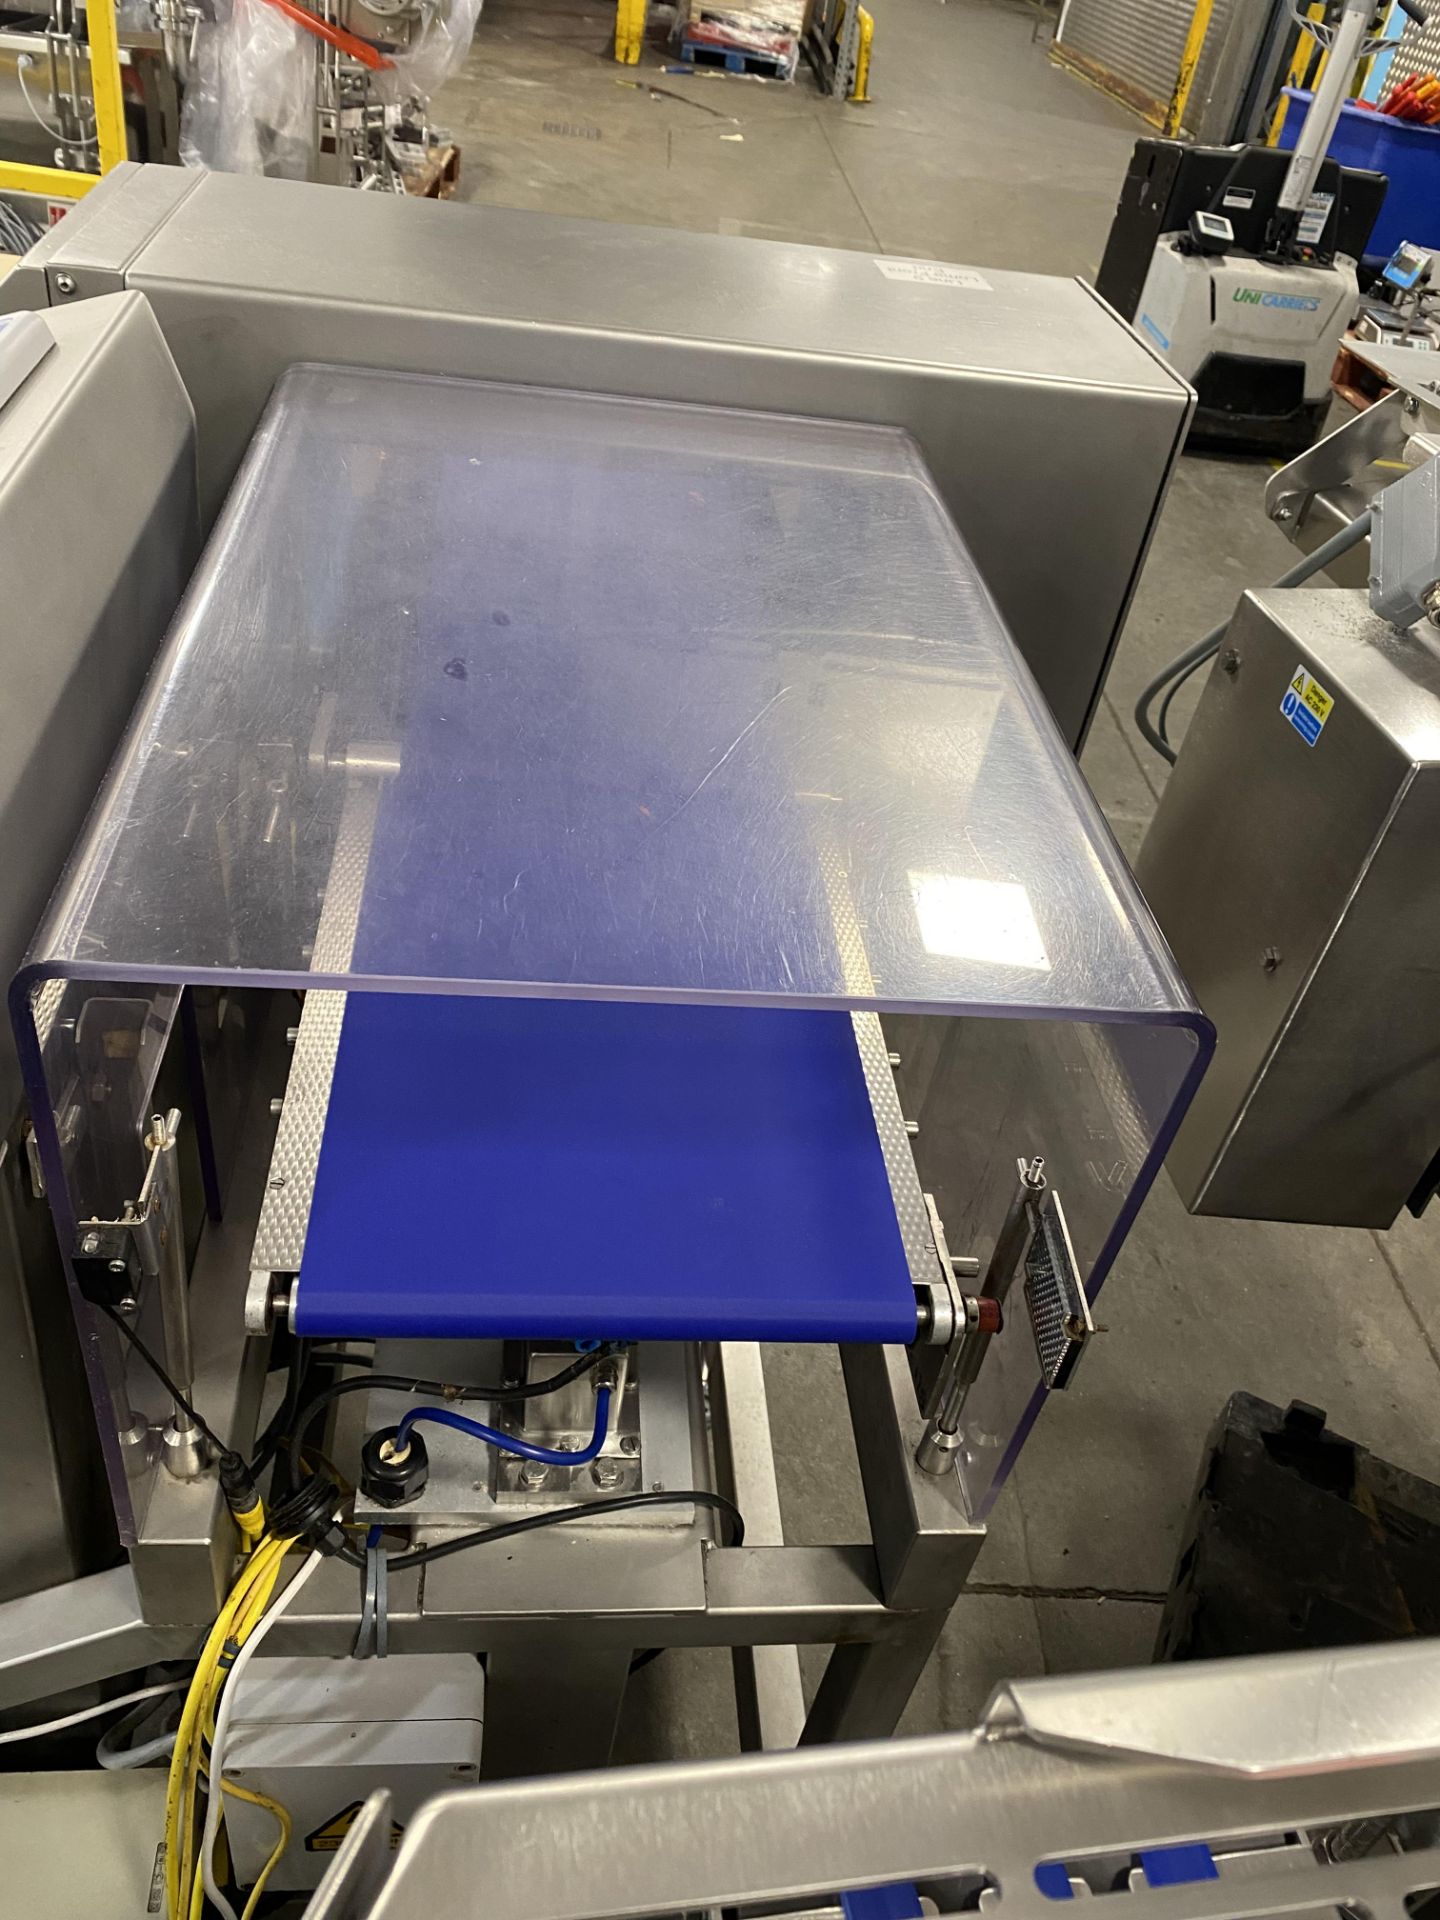 QSS Metal detecor and checkweigher combi unit, DOM - Image 4 of 4